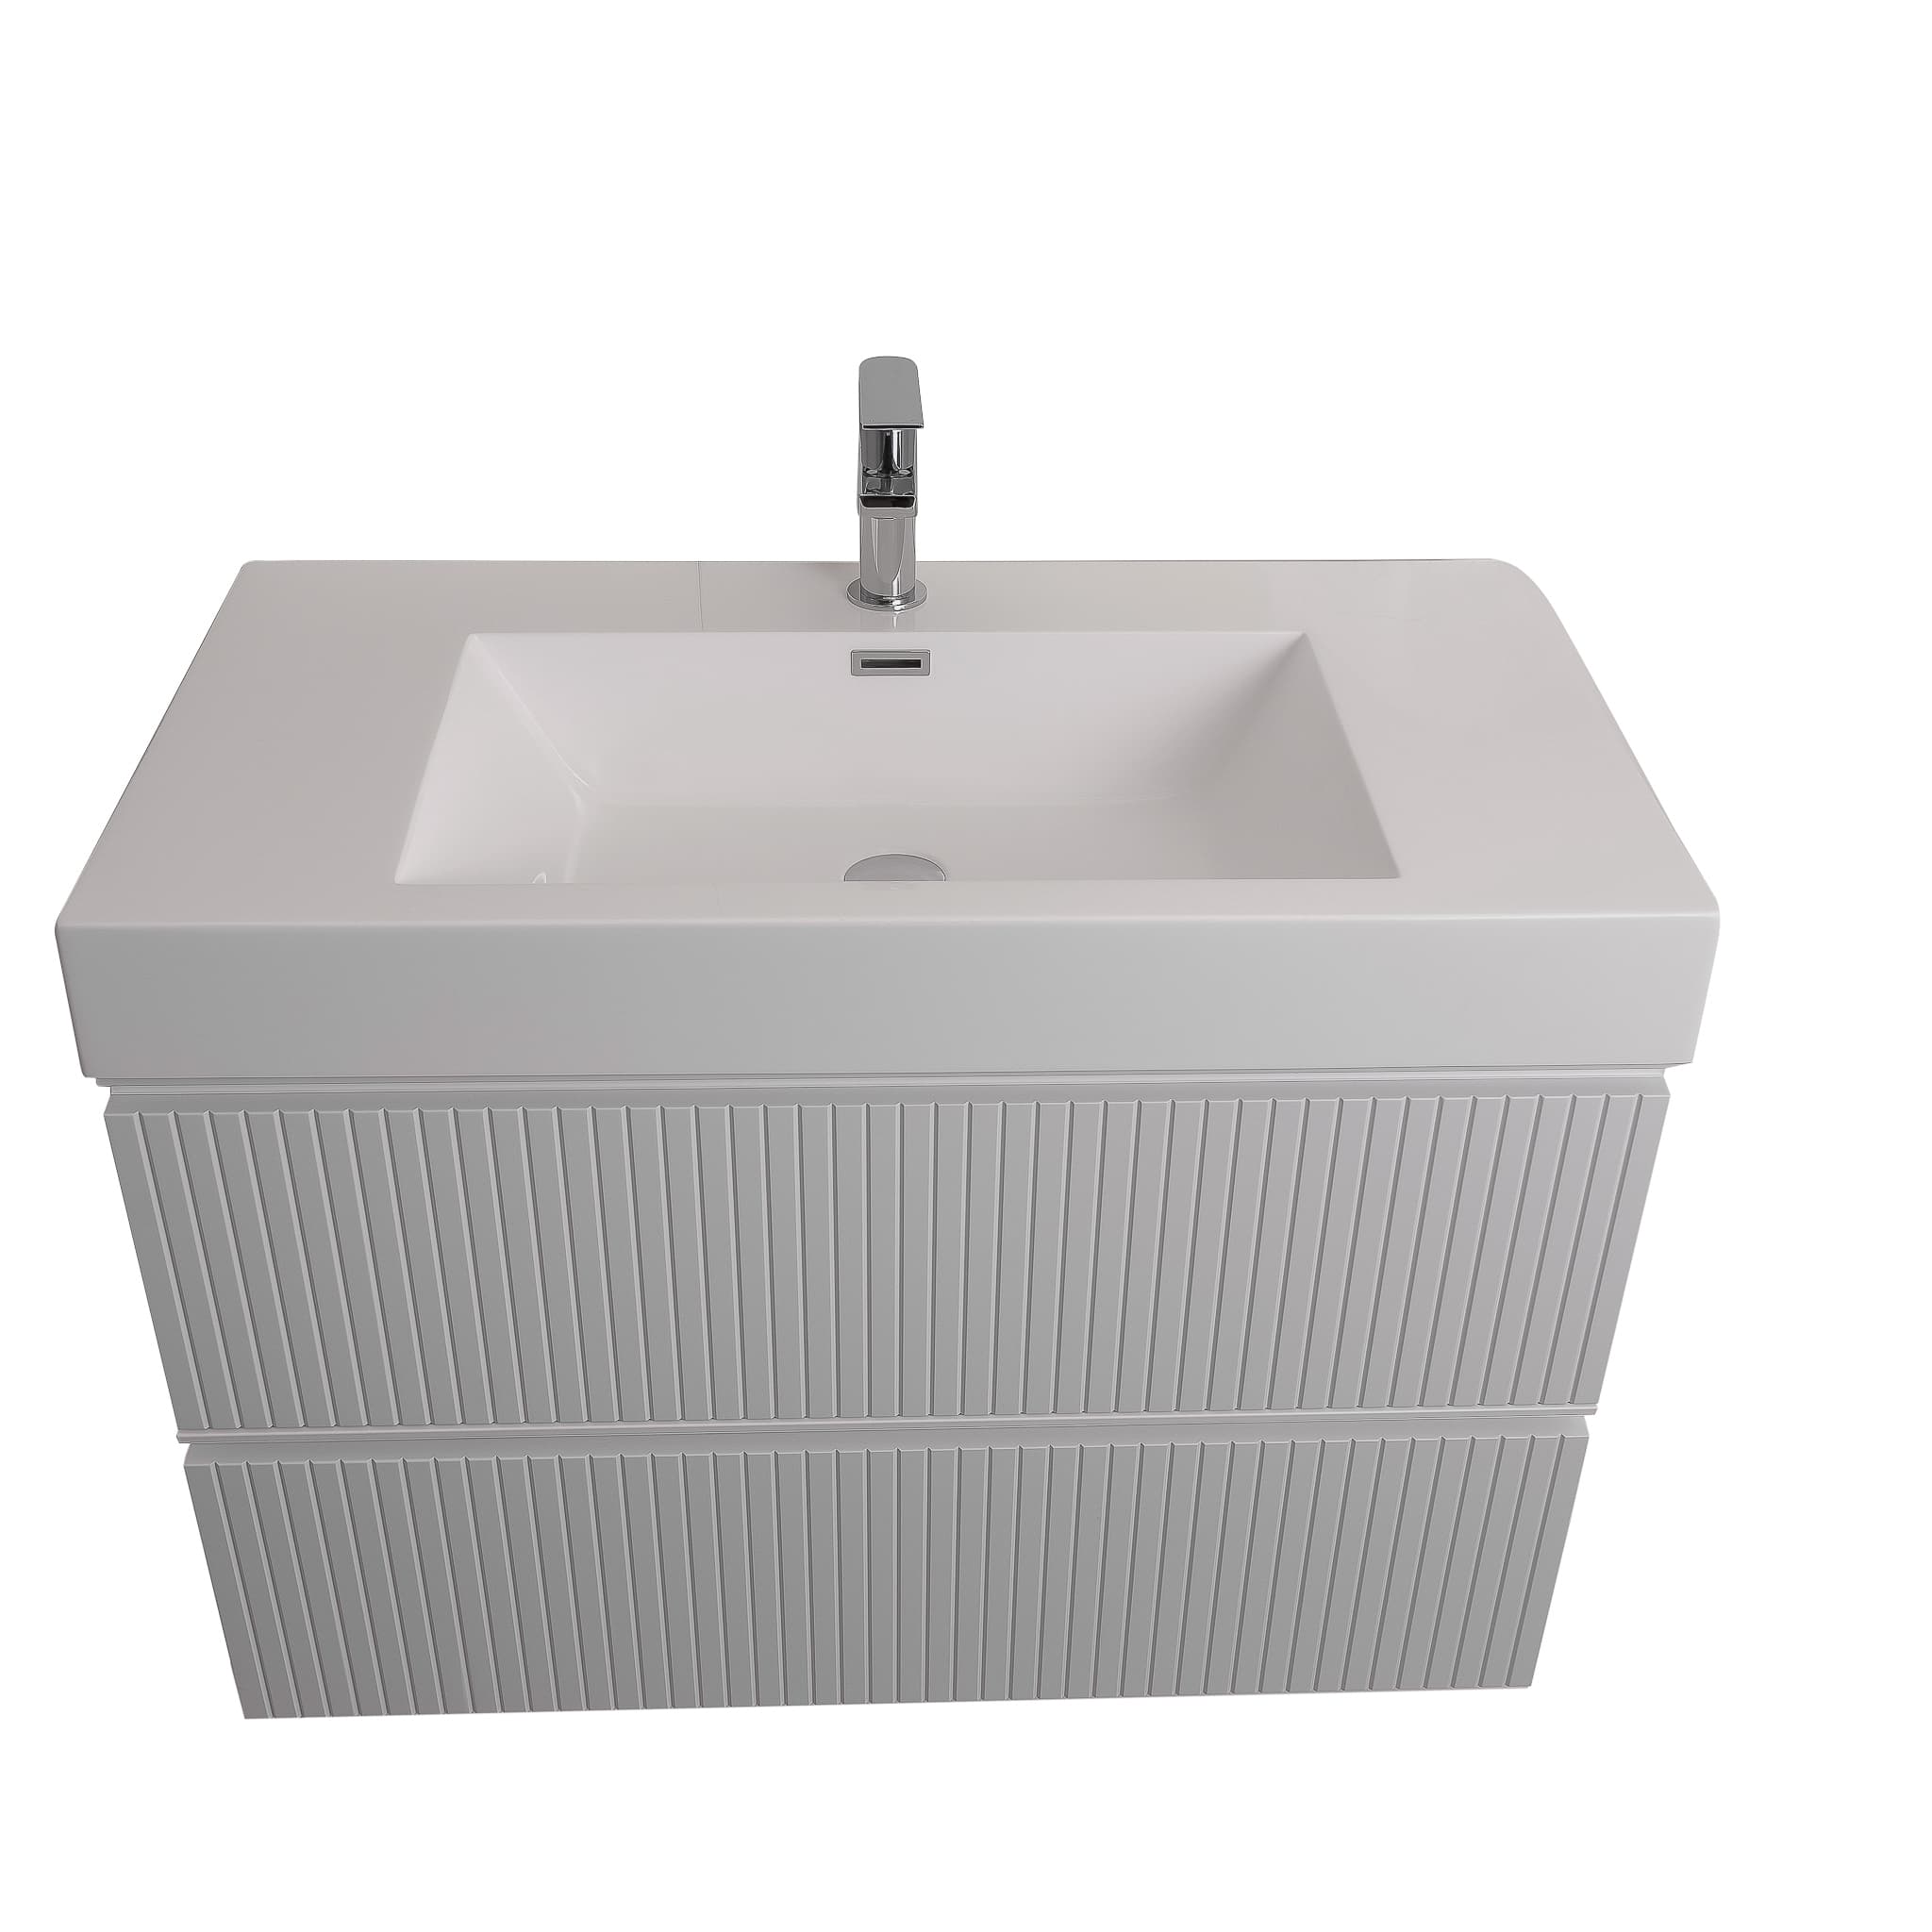 Ares 35.5 Matte White Cabinet, Square Cultured Marble Sink, Wall Mounted Modern Vanity Set